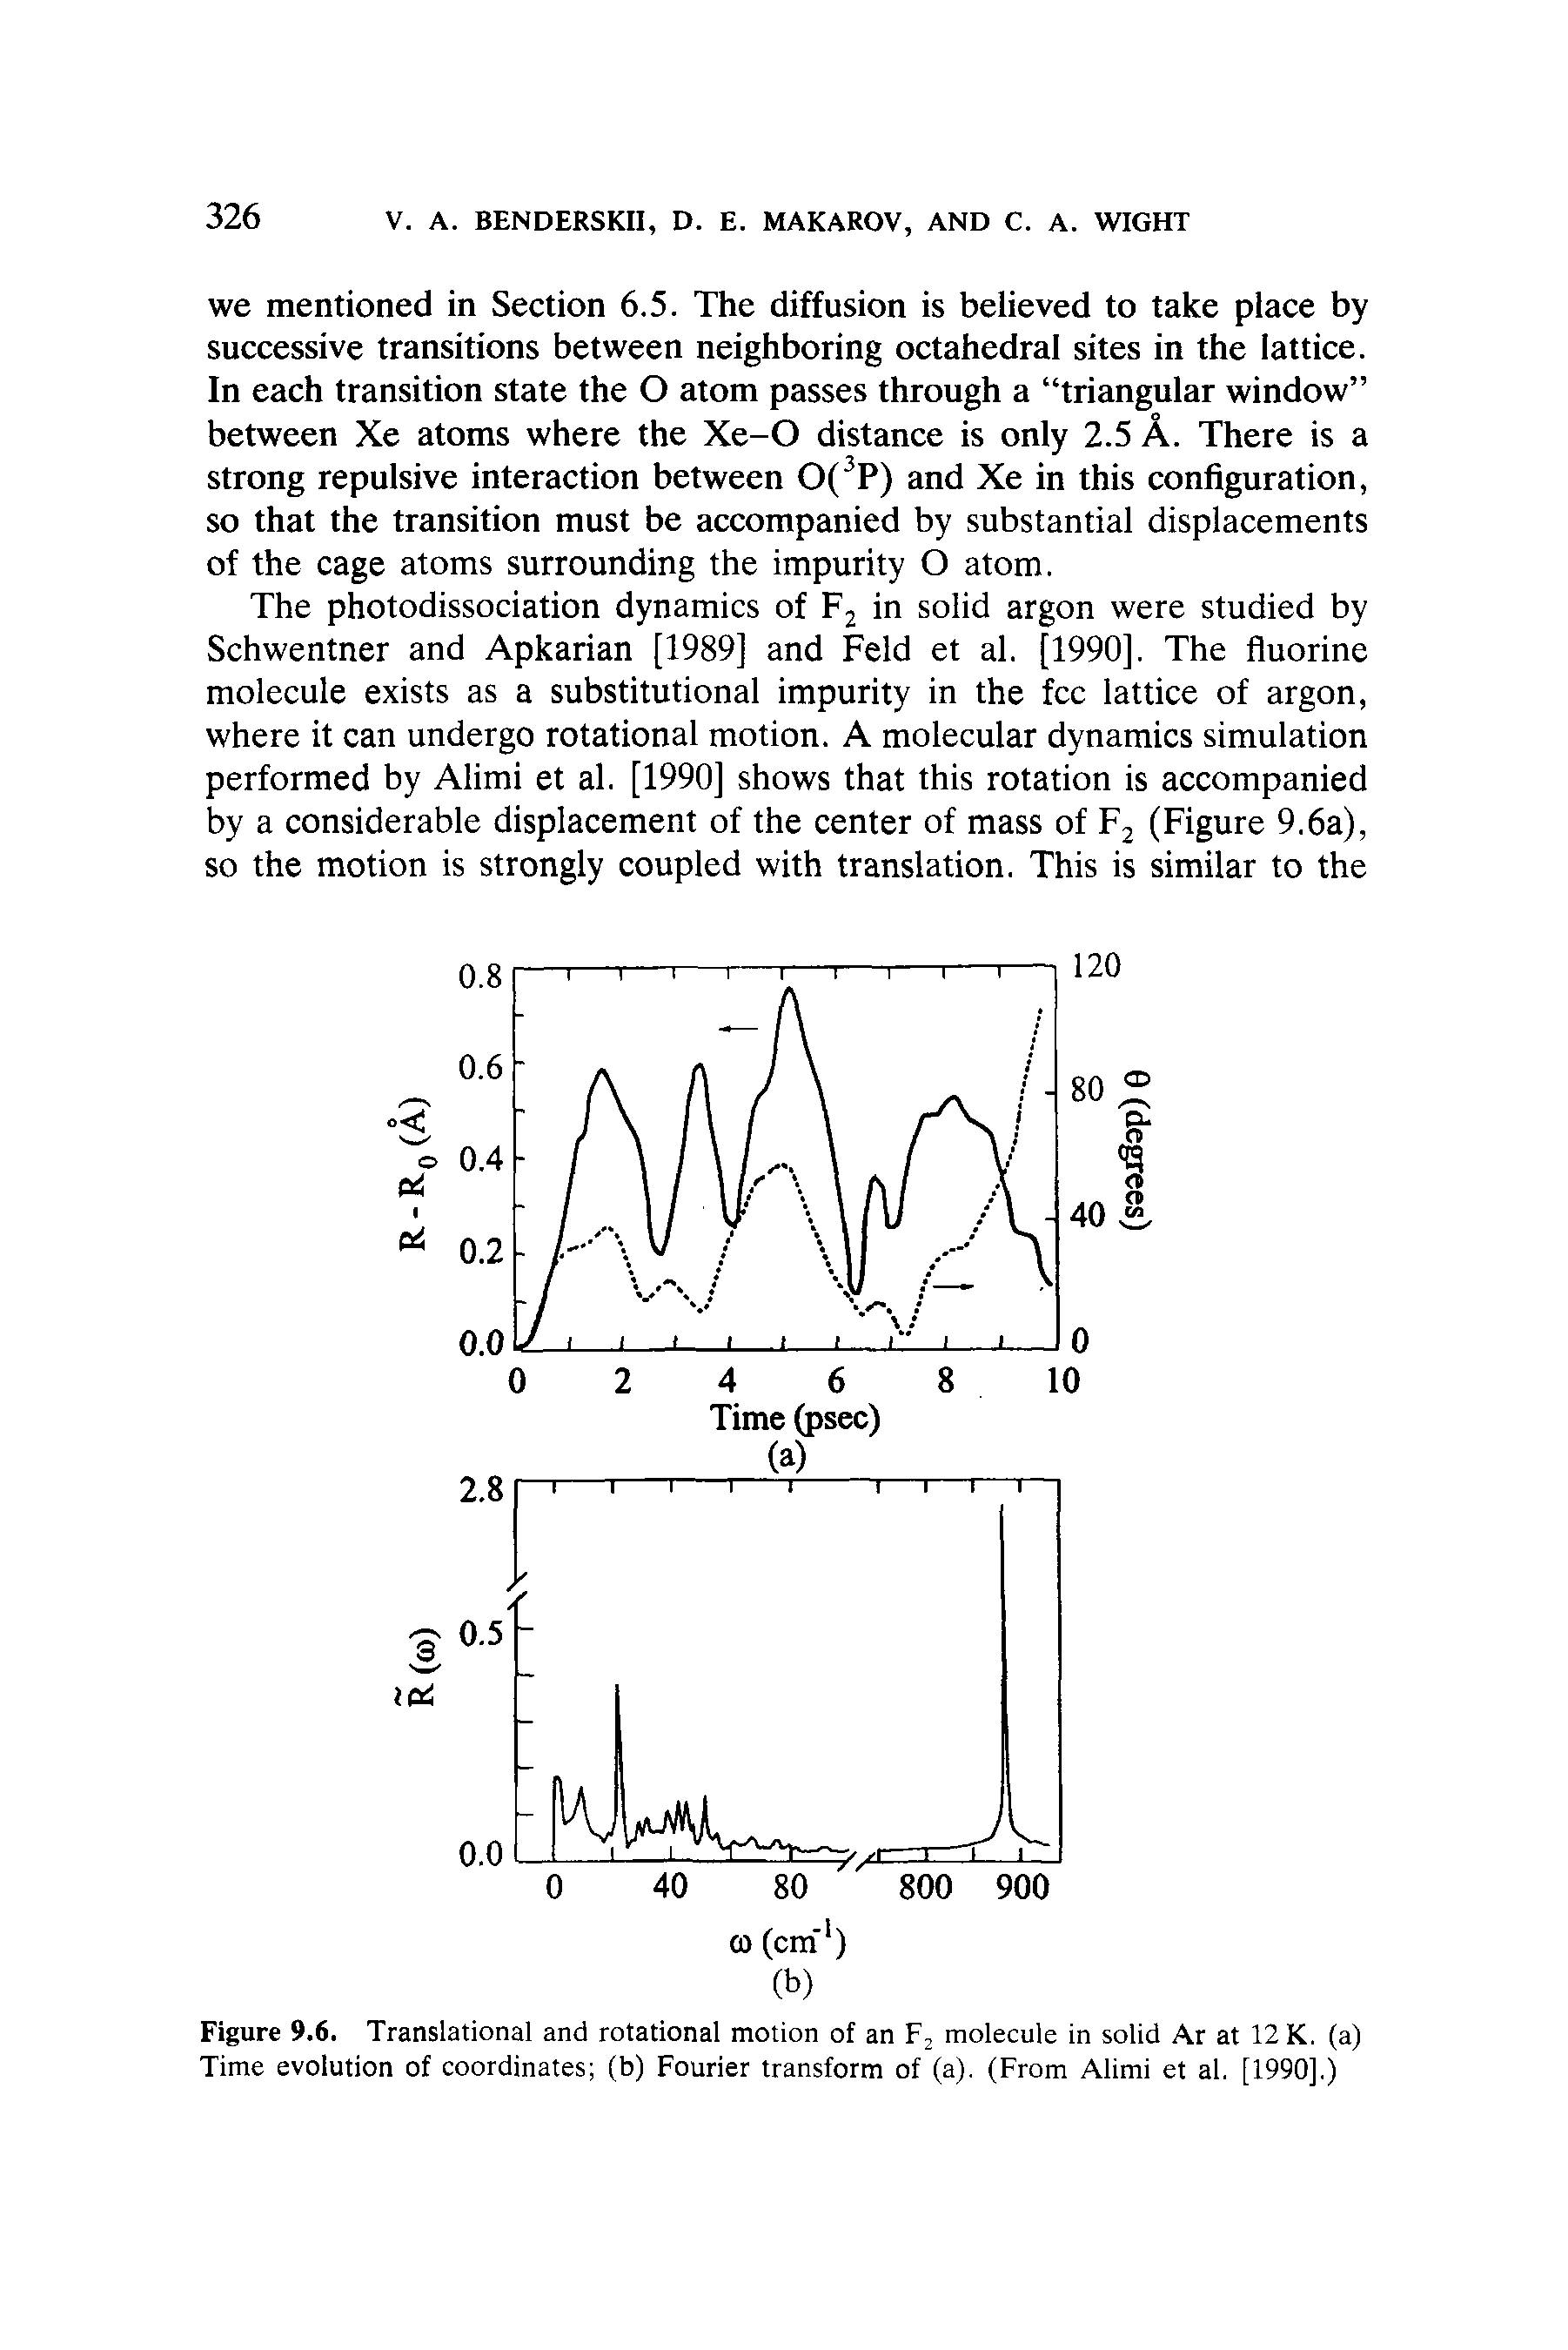 Figure 9.6. Translational and rotational motion of an F2 molecule in solid Ar at 12 K. (a) Time evolution of coordinates (b) Fourier transform of (a). (From Alimi et al. [1990].)...